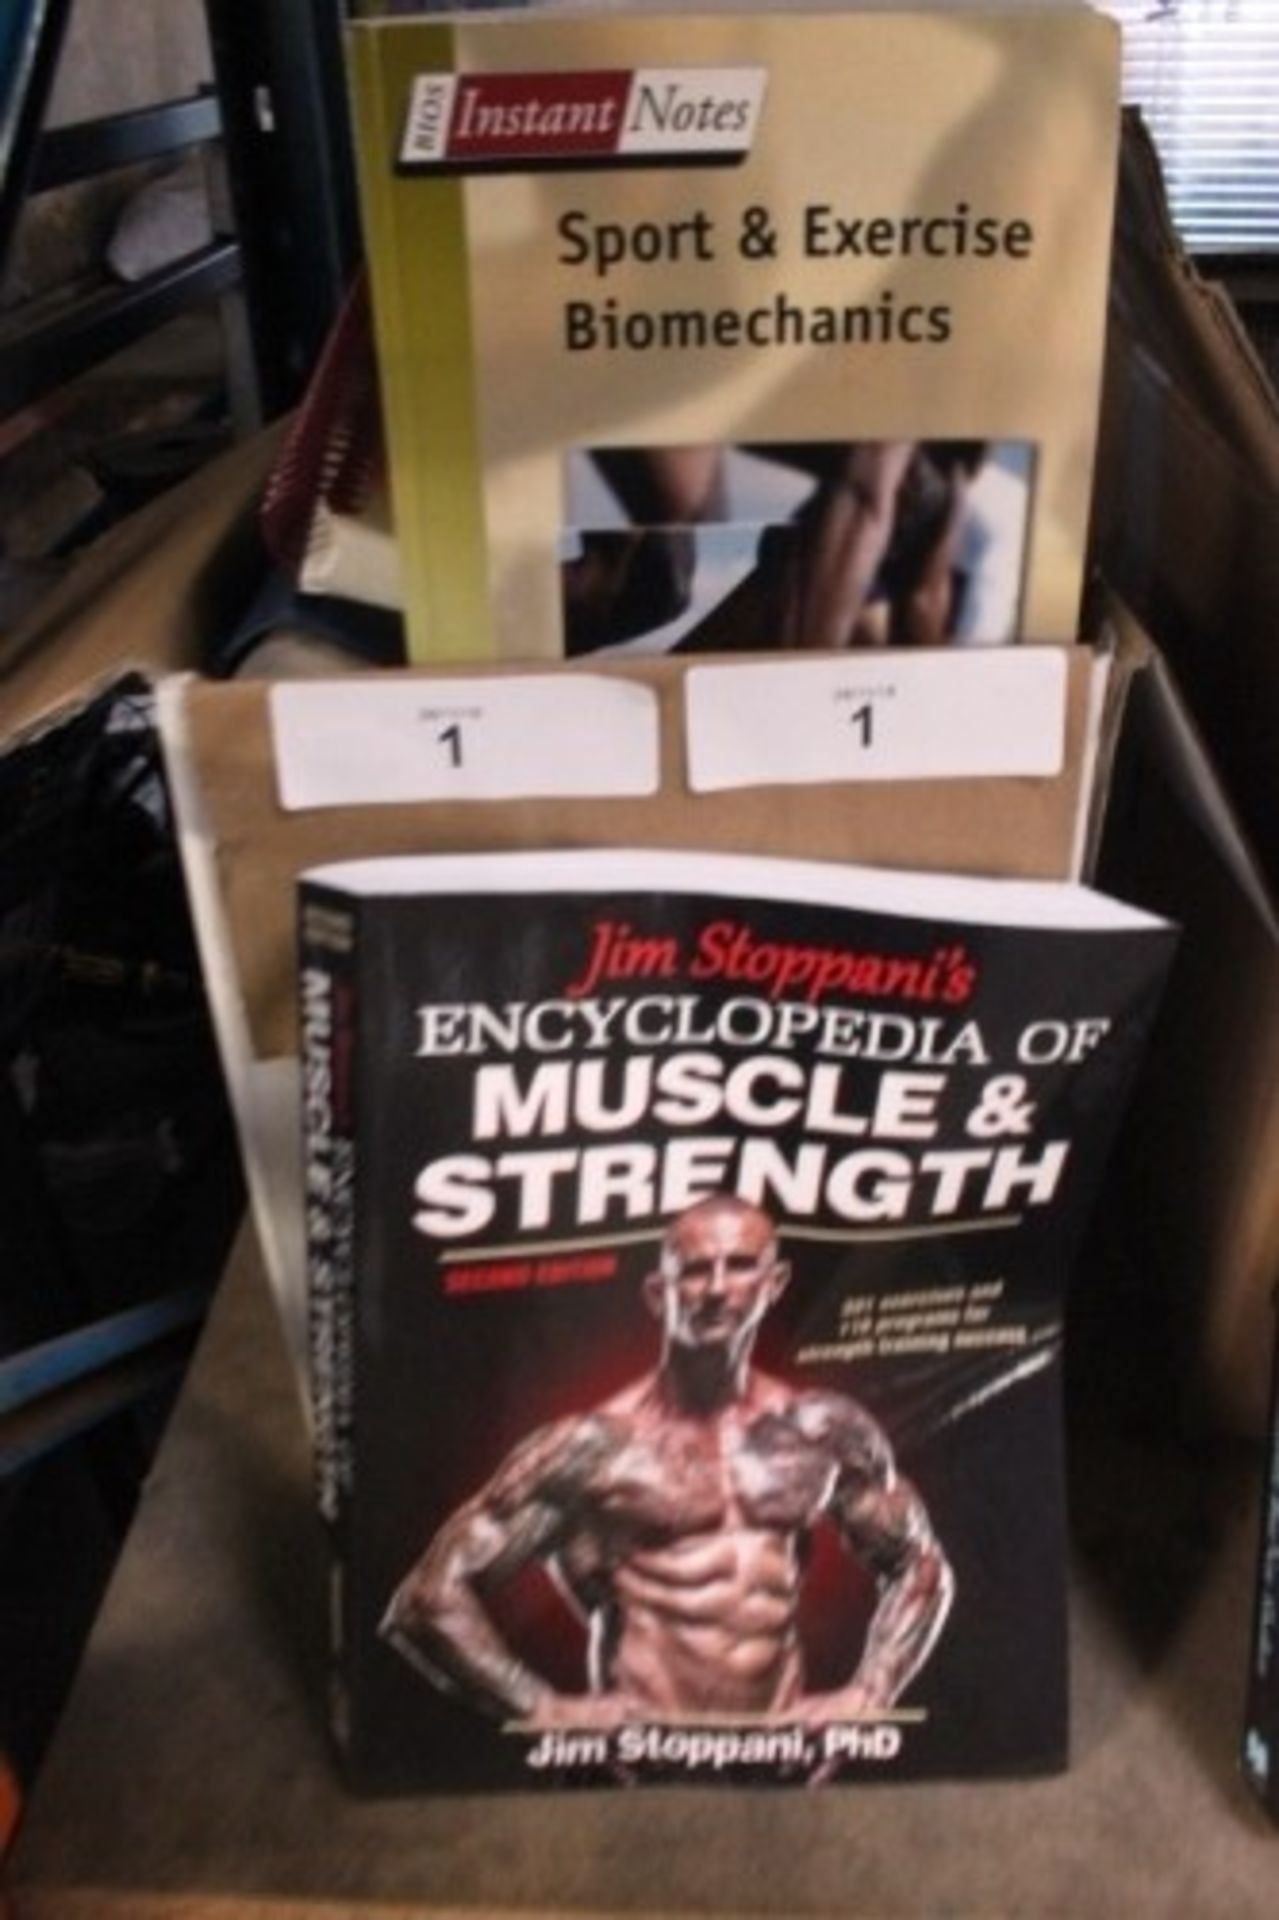 A selection of sport and body building related books including Jim Stoppani's encyclopaedia of